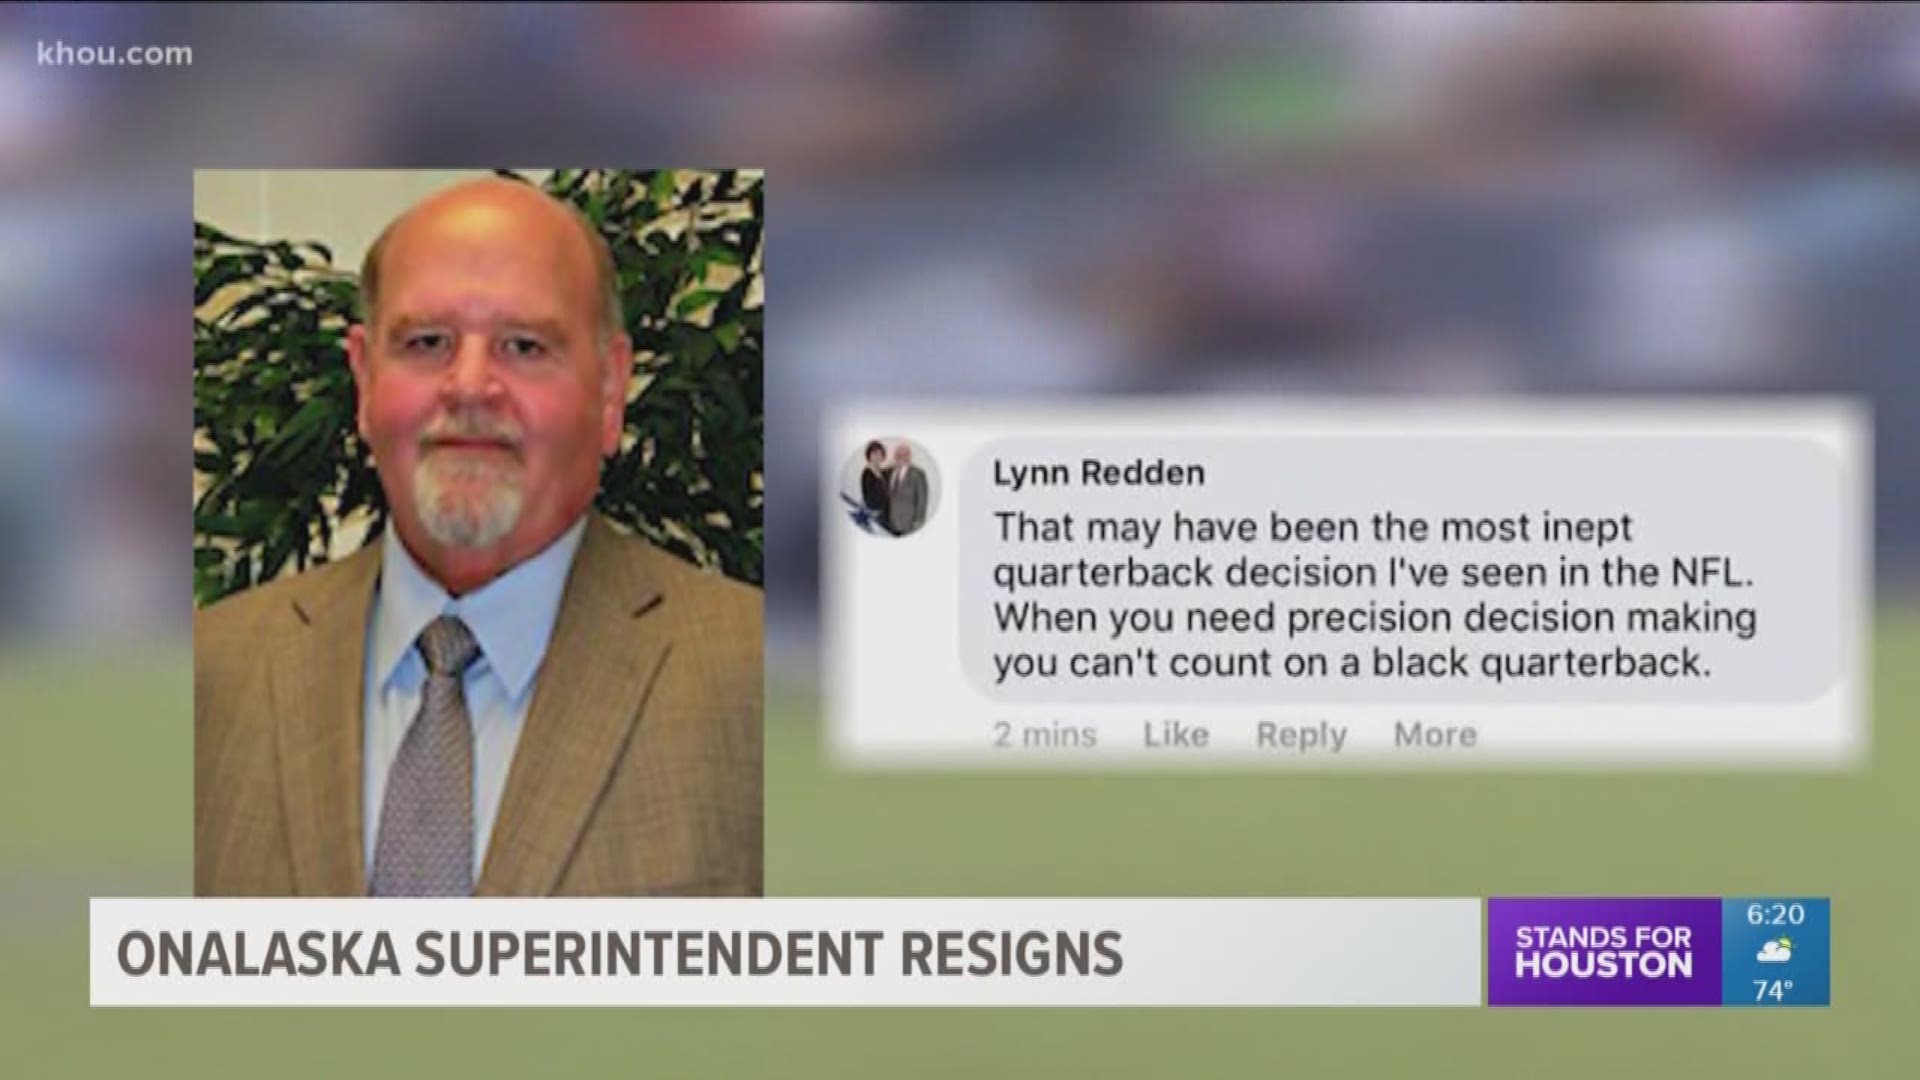 After mounting pressure, the superintendent of the Onalaska school district resigned after saying you can't count on a black quarterback.